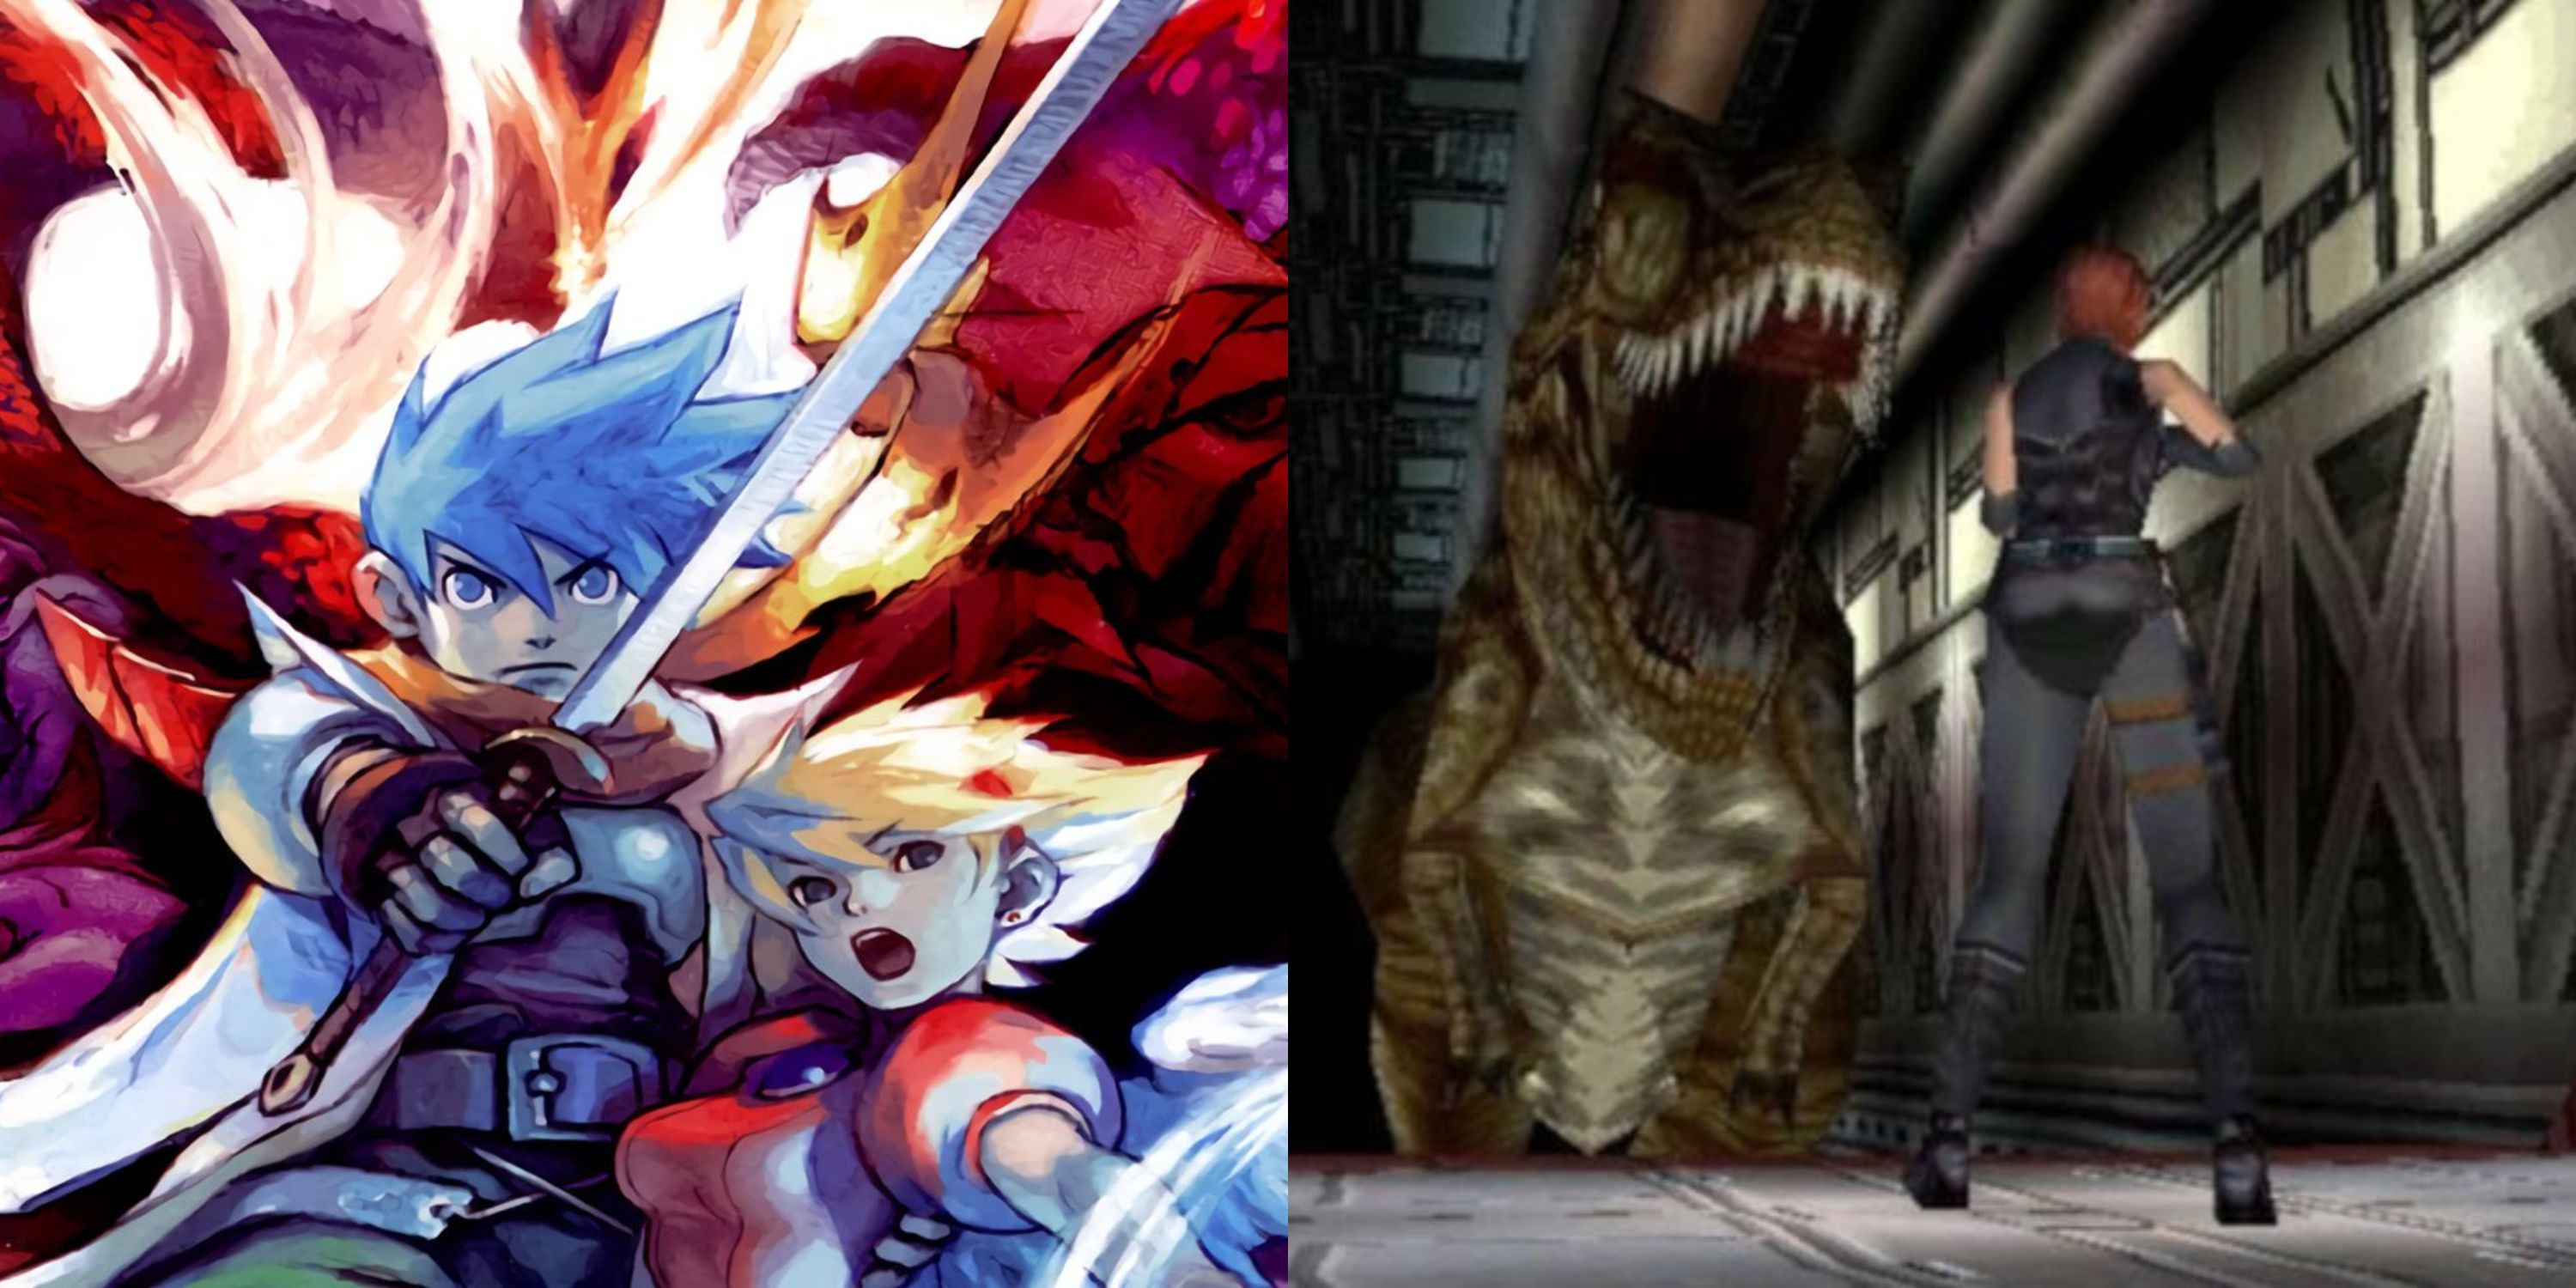 Featured image cover art for Breath of Fire III and gameplay from Dino Crisis